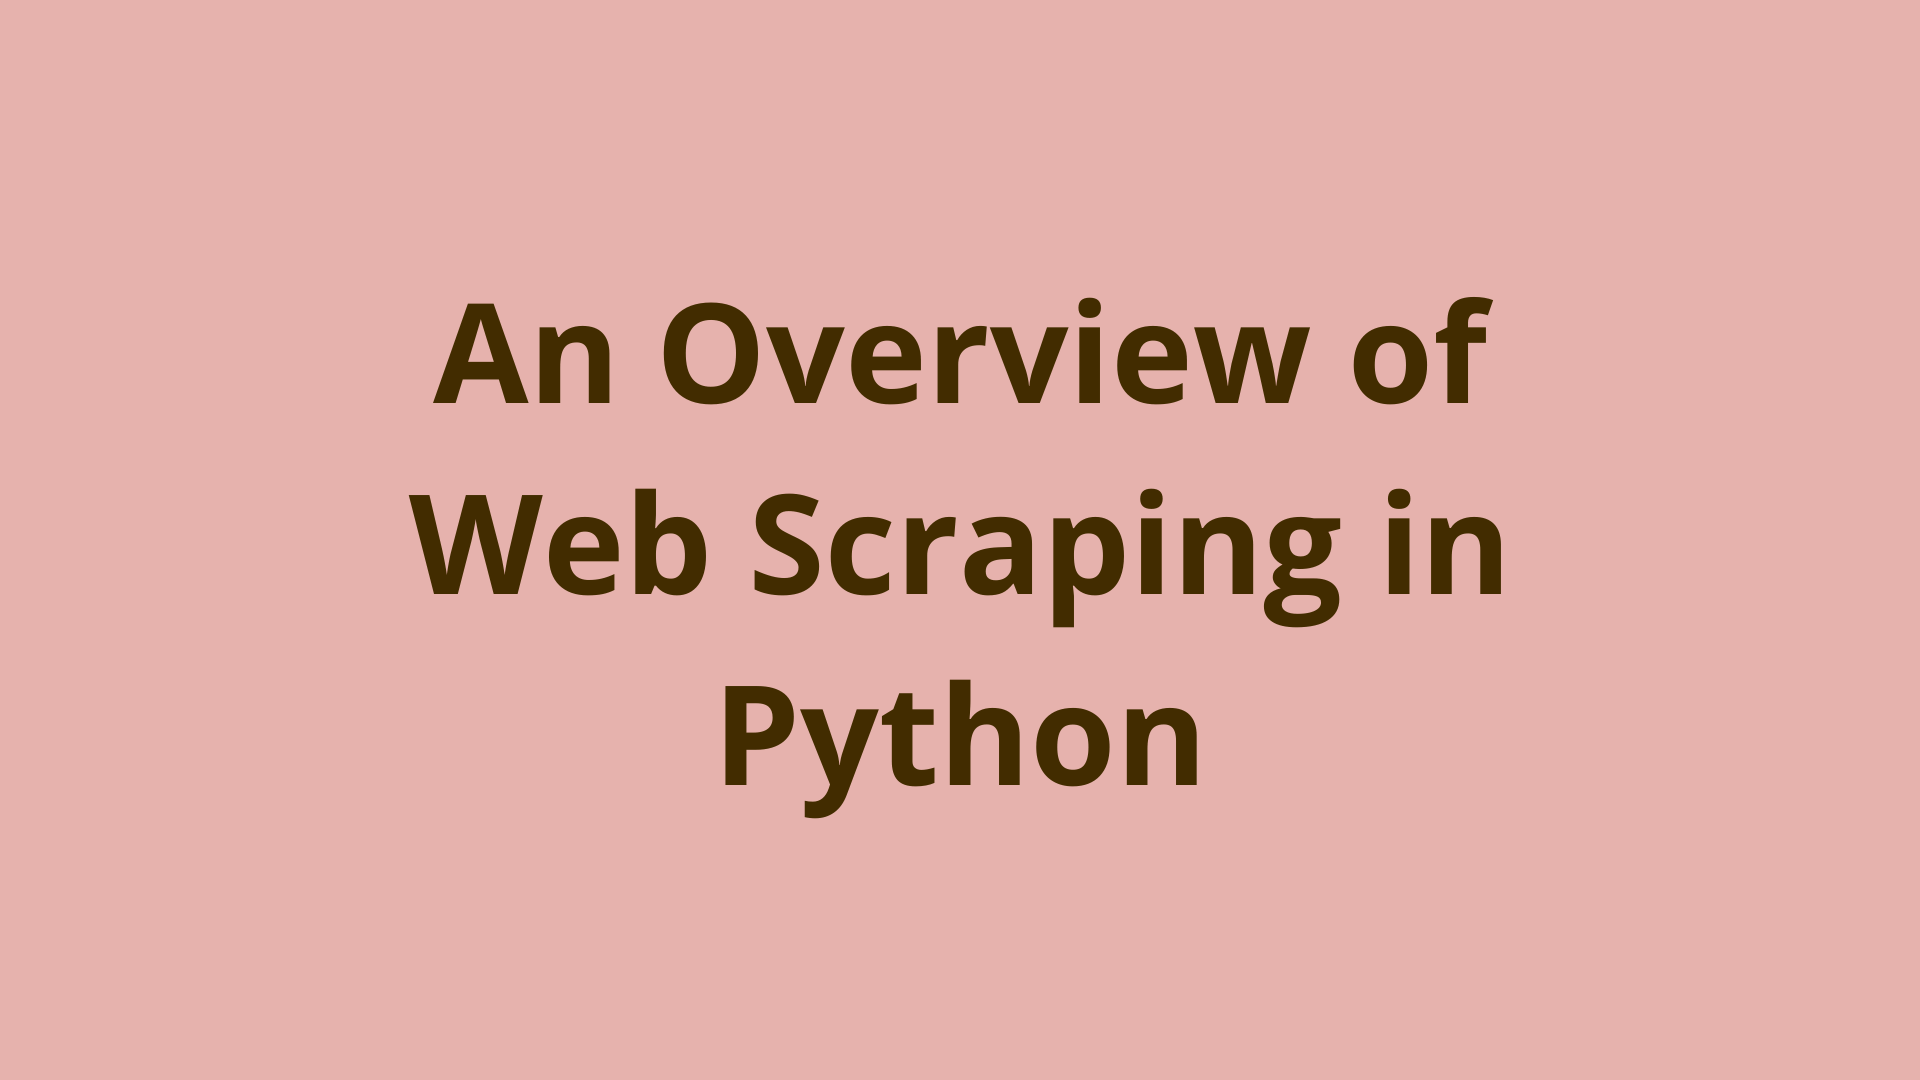 Image of An Overview of Web Scraping in Python